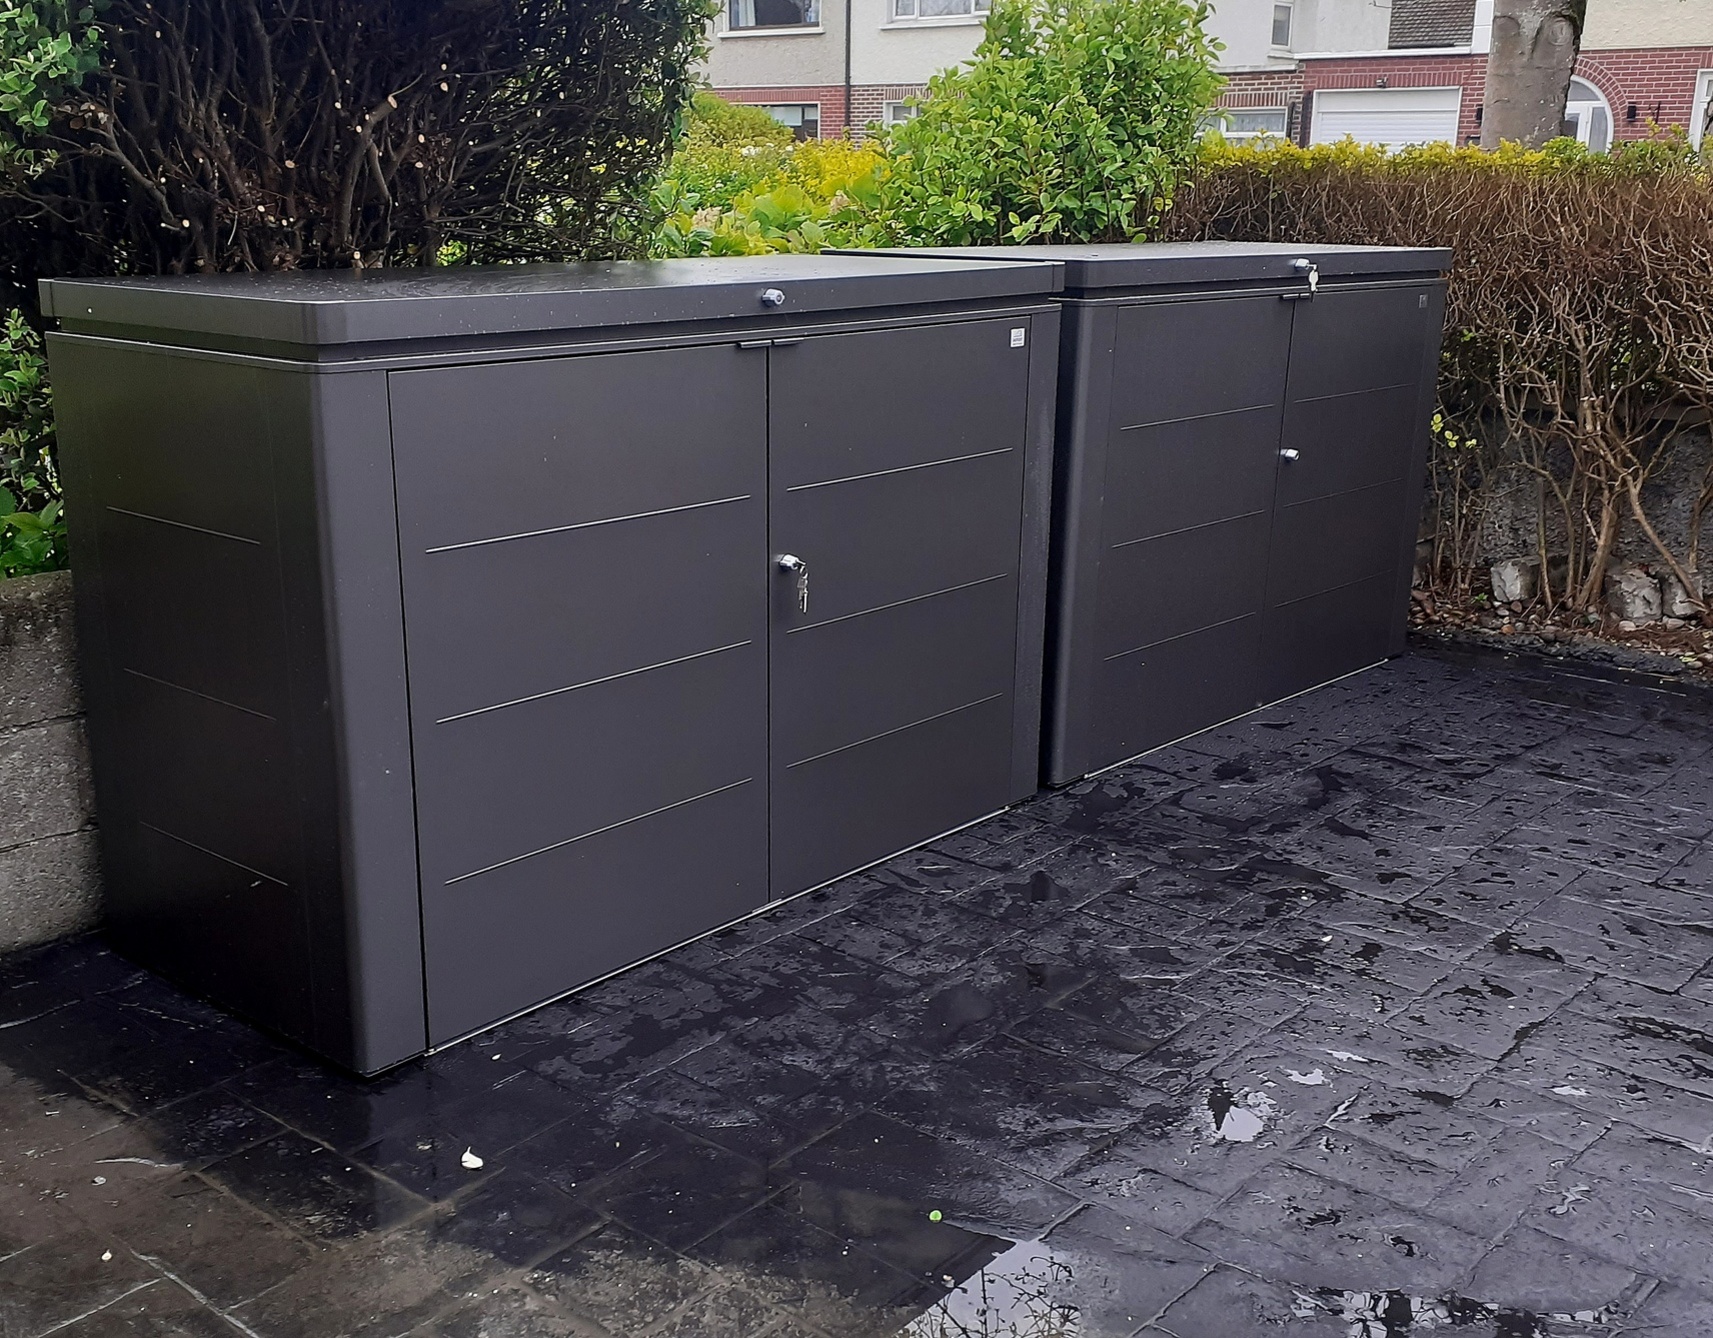 Biohort HighBoard 200 Storage Unit. Strong. Stylish. Durable. Storage for Bins, Bikes etc  | Supplied + Fitted in Raheny, Dublin 5 by Owen Chubb Landscapers.